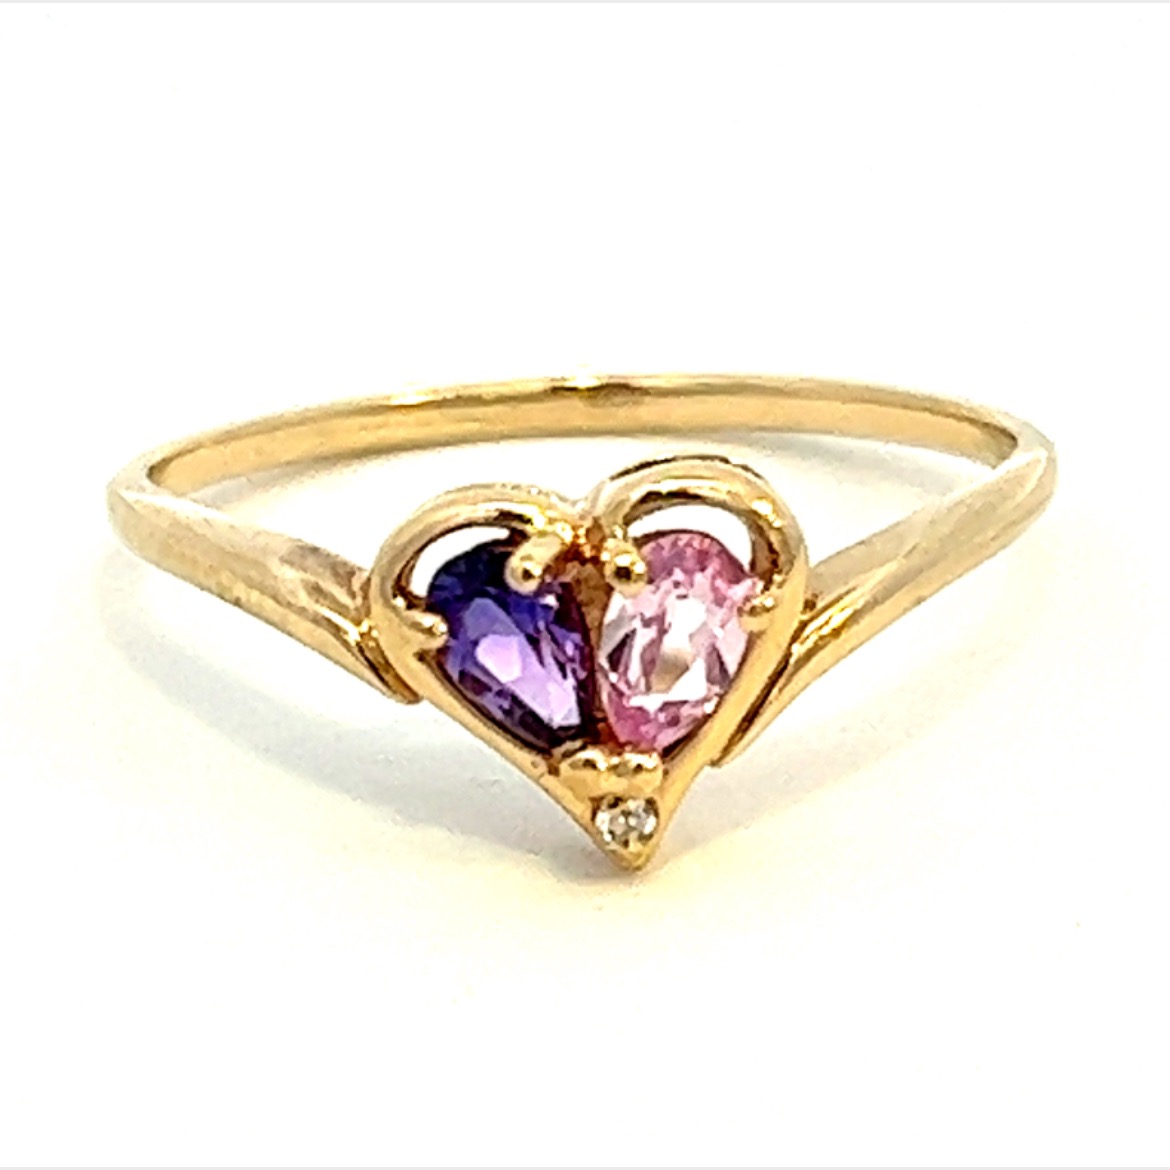 Tues Nov 8 – 10K Yellow Gold Heart Ring with Purple Stones – $129